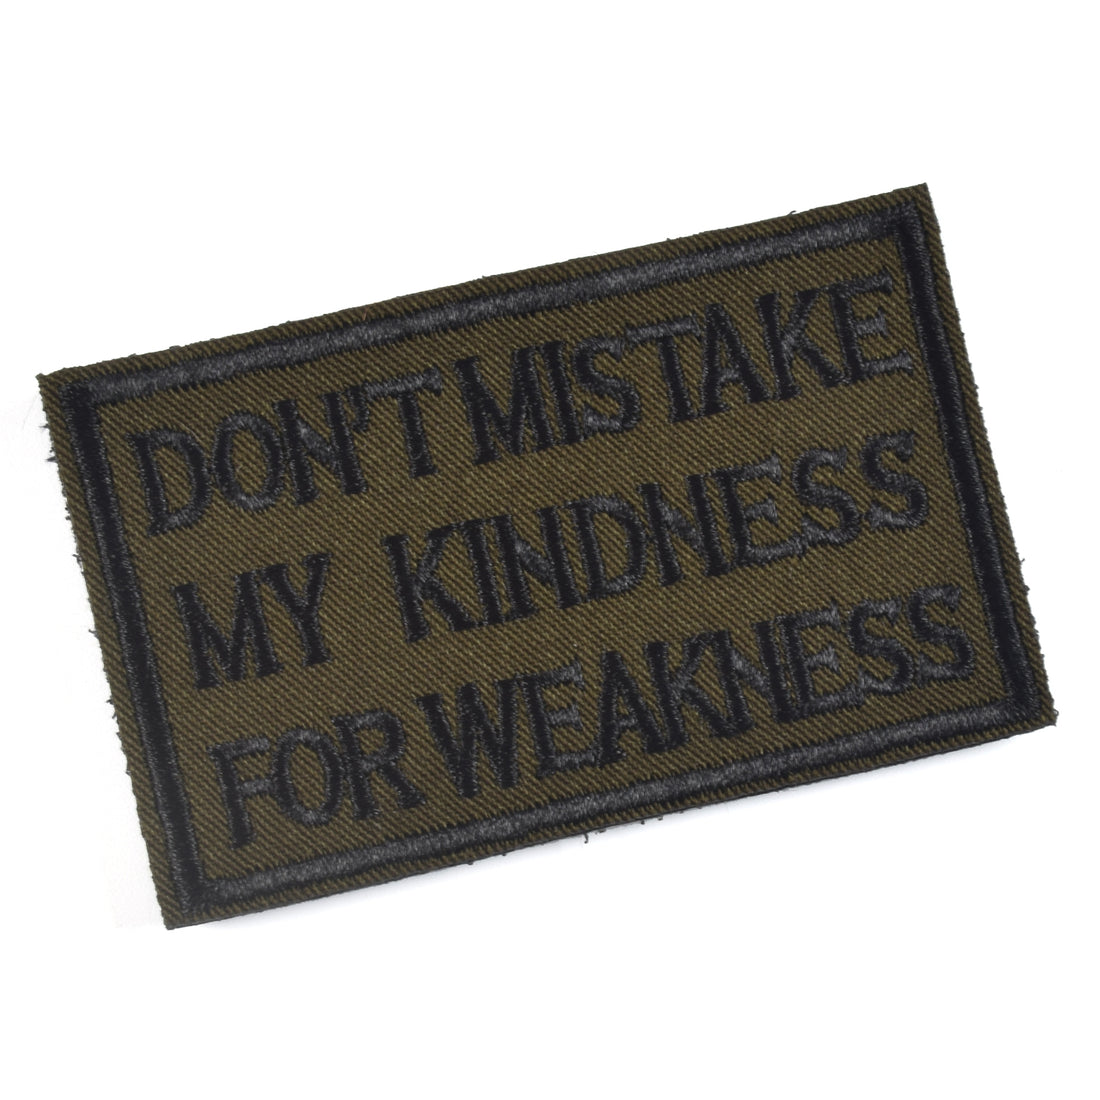 DON'T MISTAKE MY KINDNESS FOR WEAKNESS Patch, Tactical Morale Patch with Hook & Loop Decorative Embroidered, Green